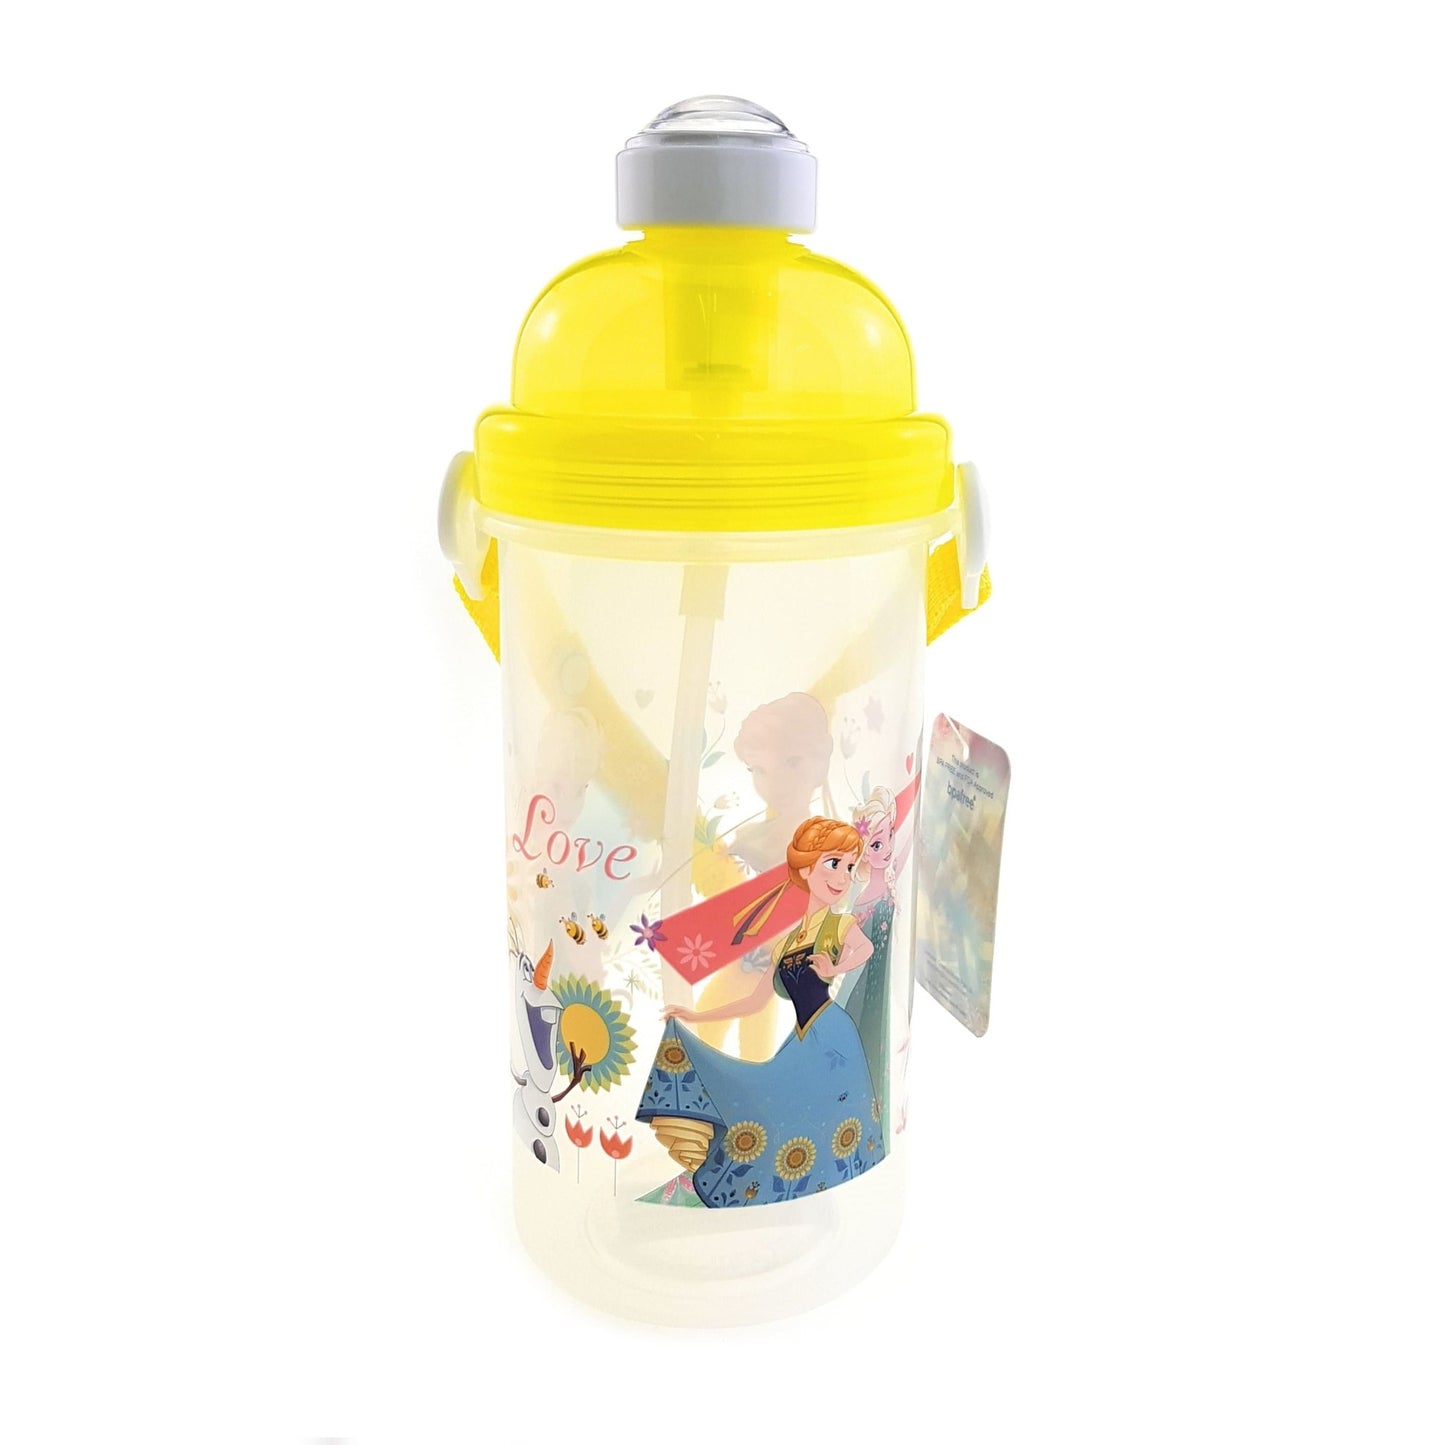 Disney Frozen - Pop-up Straw Canteen Water Bottle with Adjustable Strap (BPA-free), Yellow - Simply Life